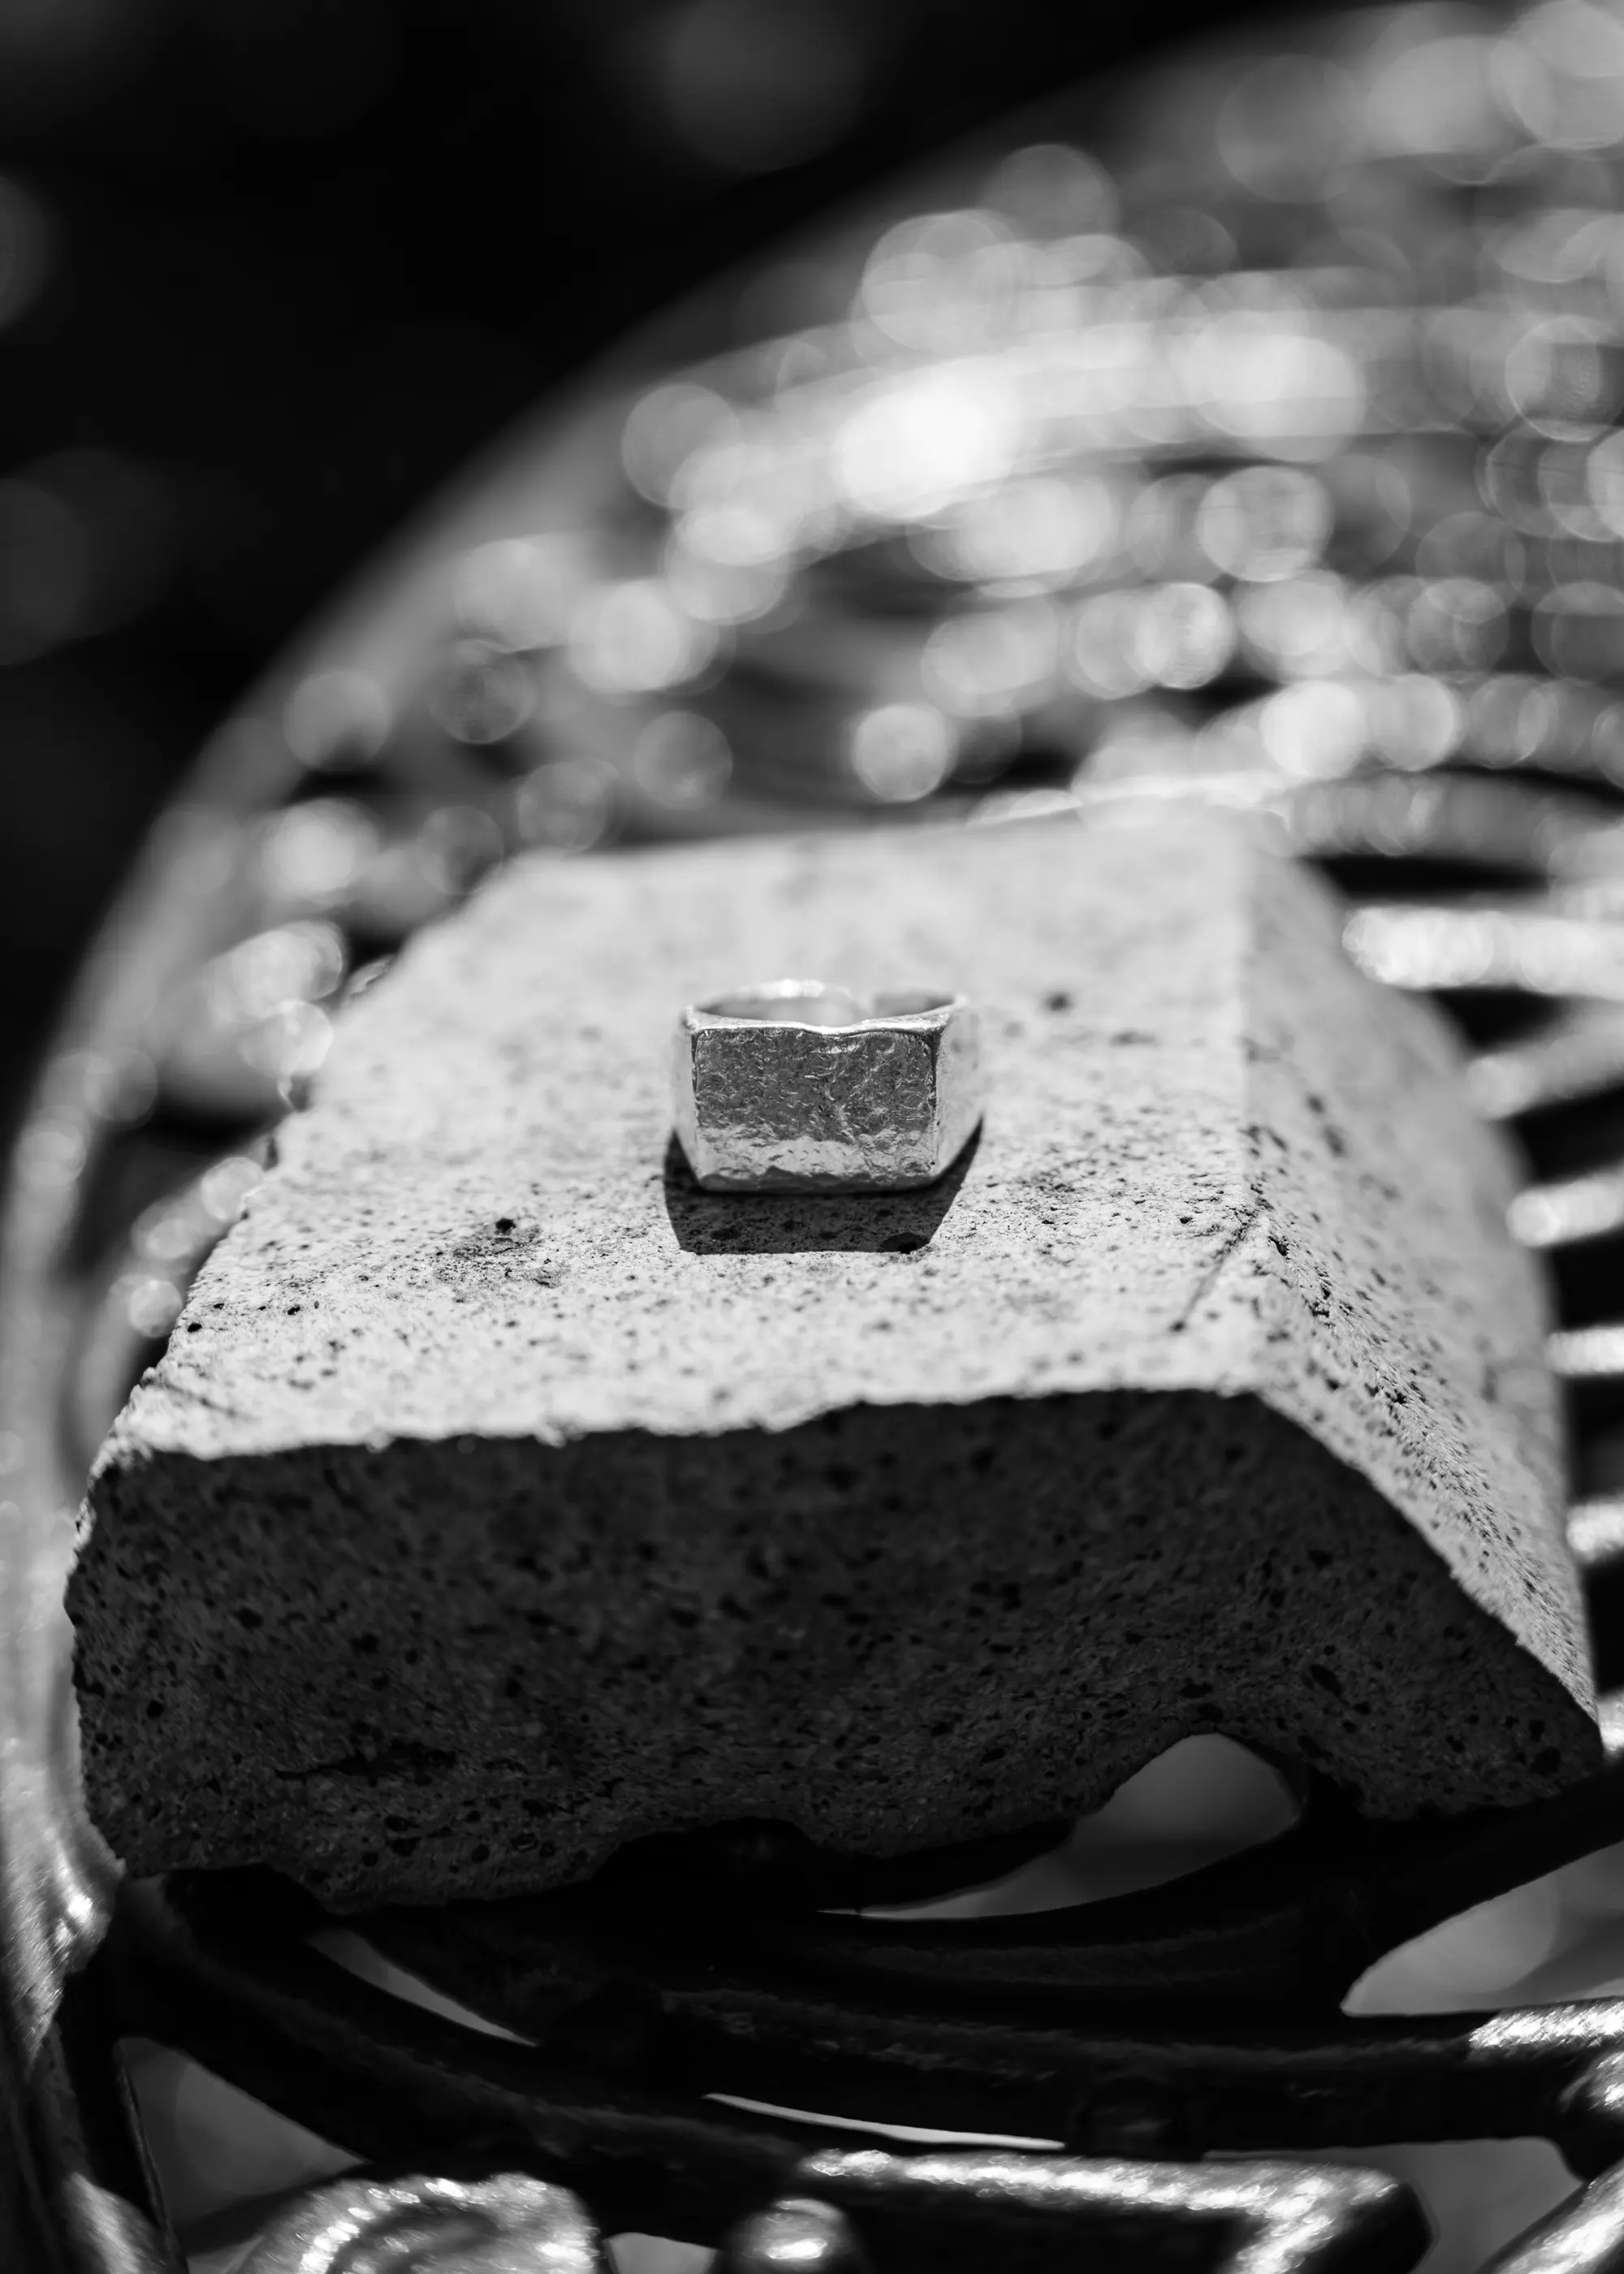 A silver square edged ring, placed on a rock - Silvawear.